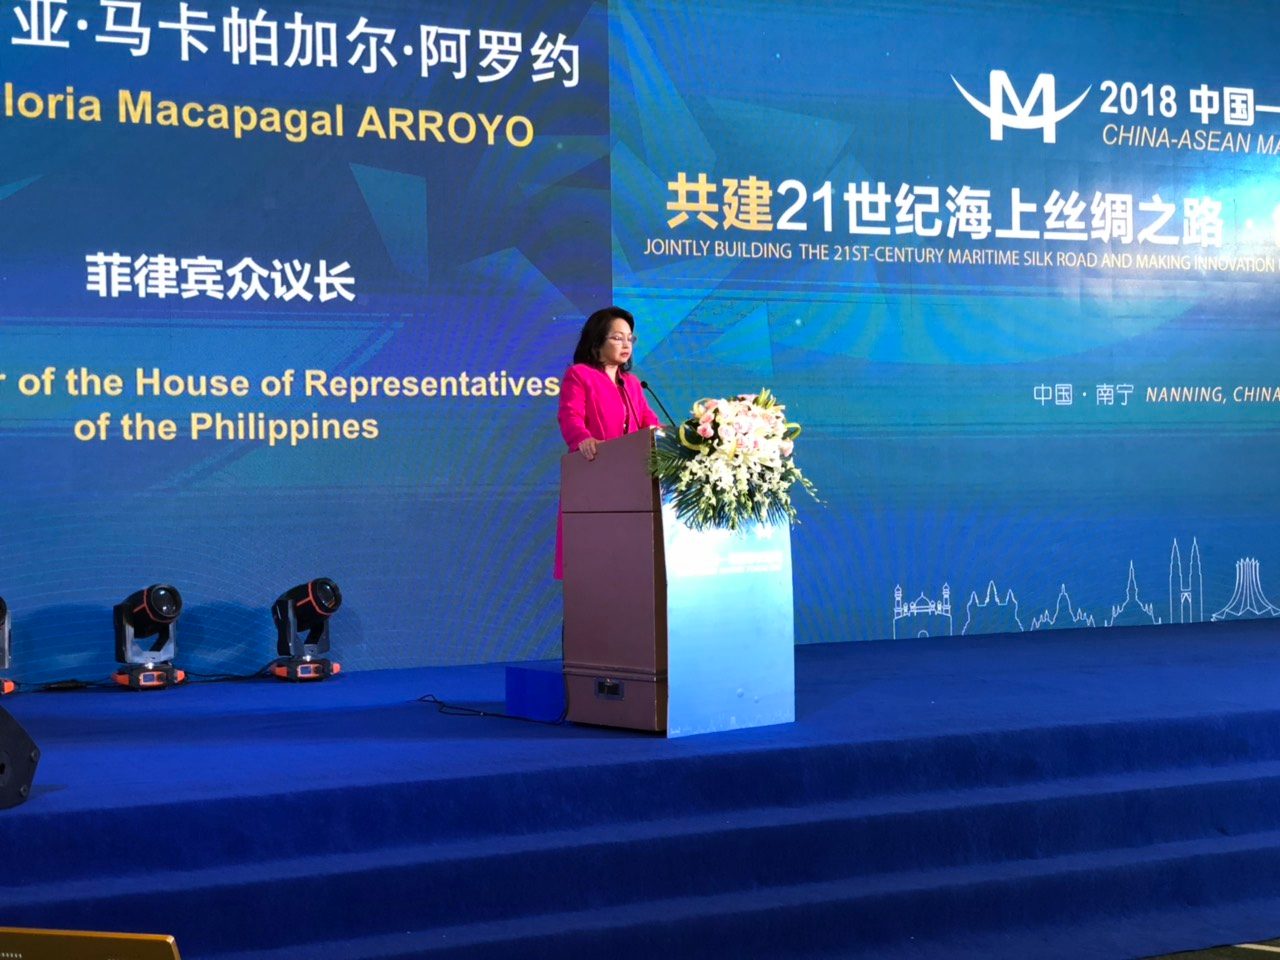 China should be ‘Big Uncle’ to ASEAN, says Arroyo